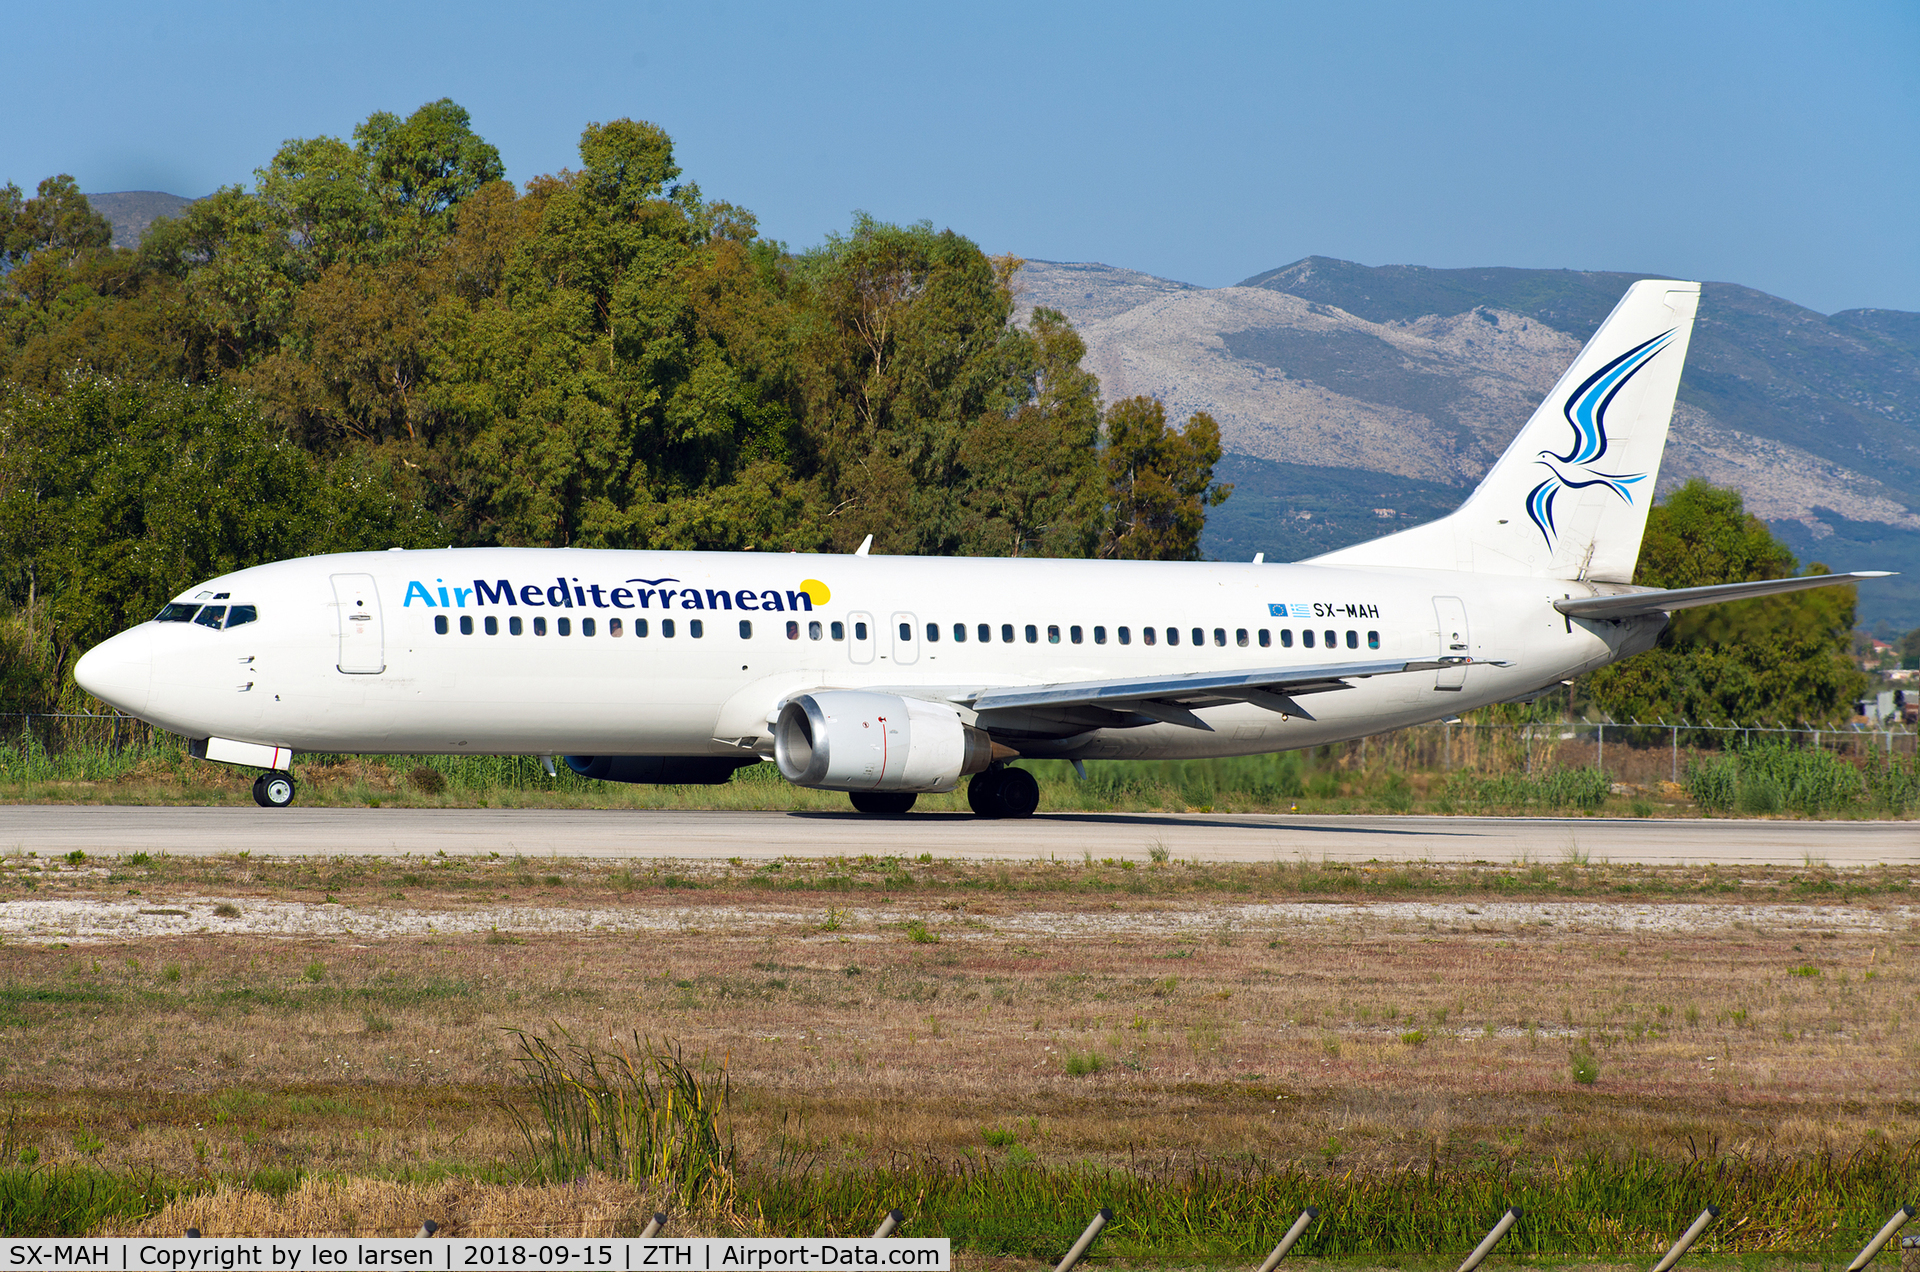 SX-MAH, 1990 Boeing 737-405 C/N 24643, Zakynthos 15.9.2018 flying for Ellinair to and from ST.Petersburg.